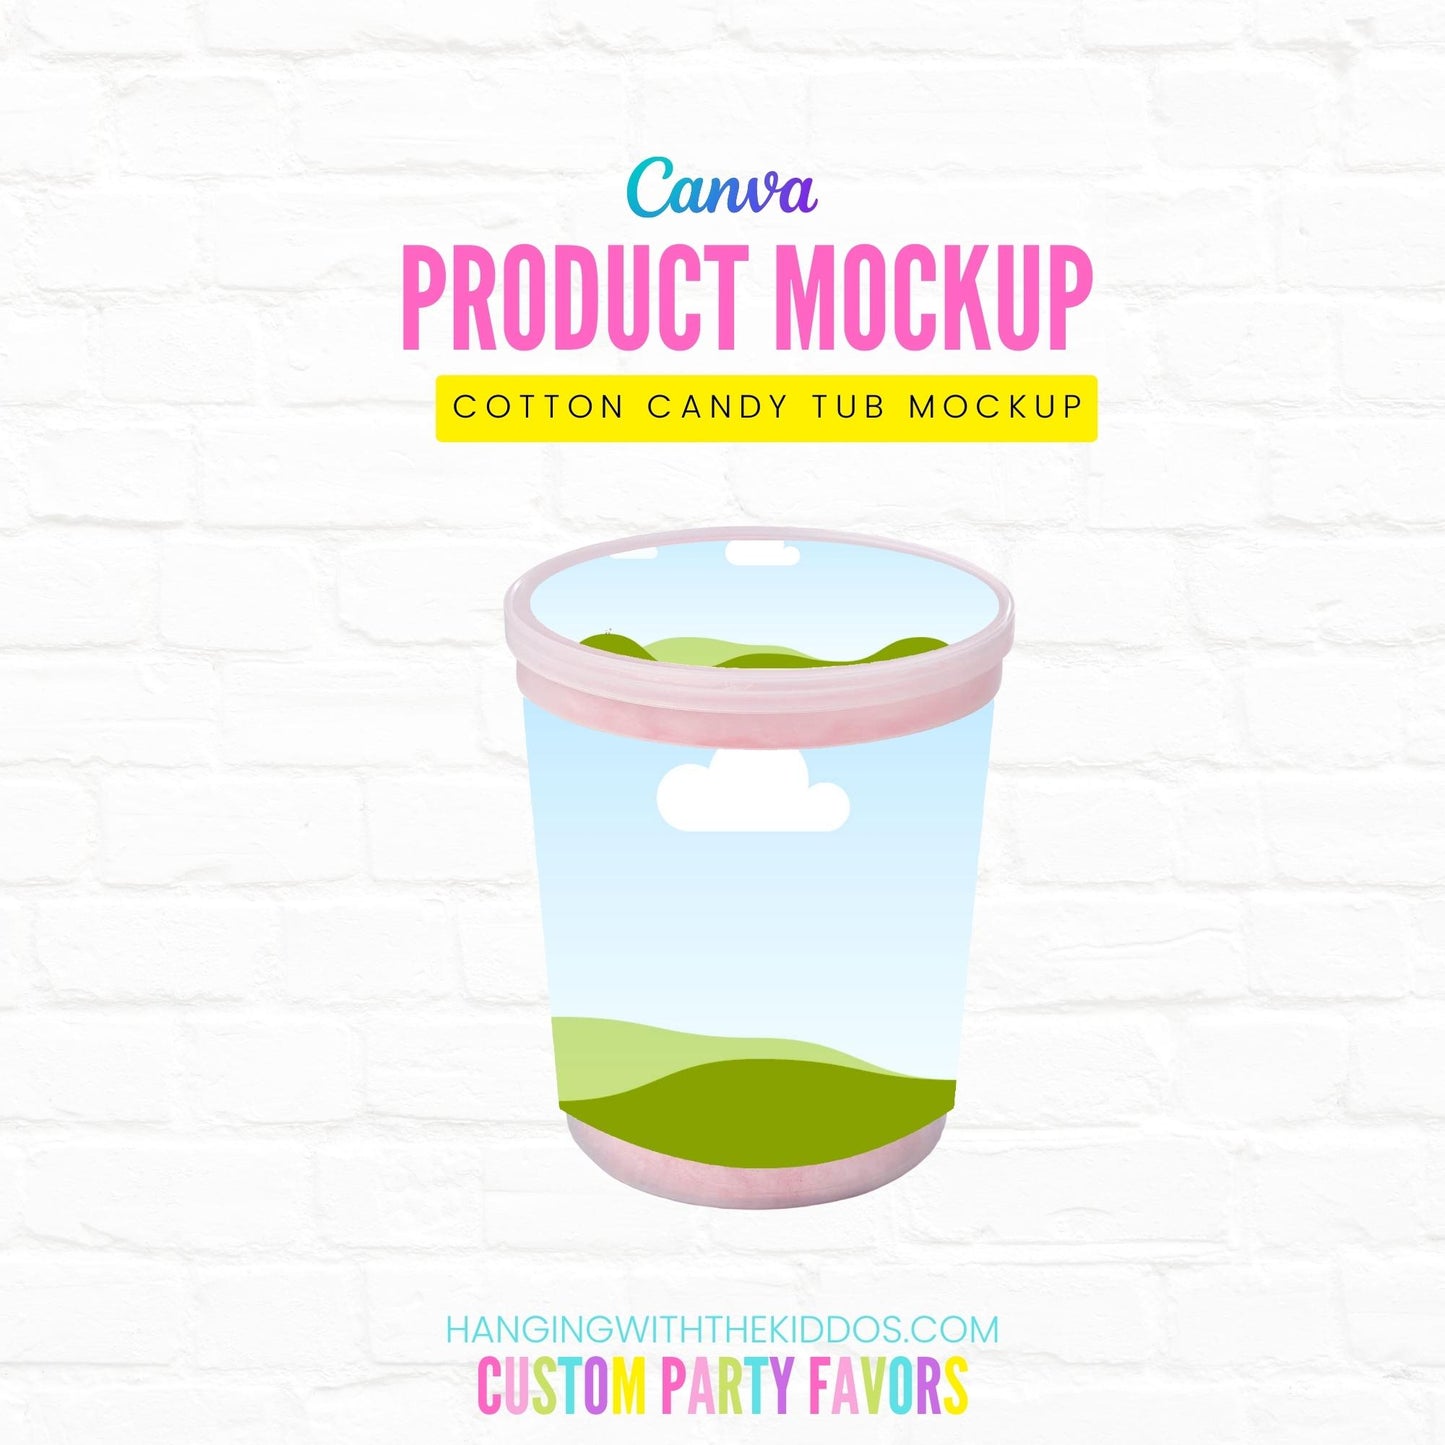 Cotton Candy Tub Mockup|Canva Template